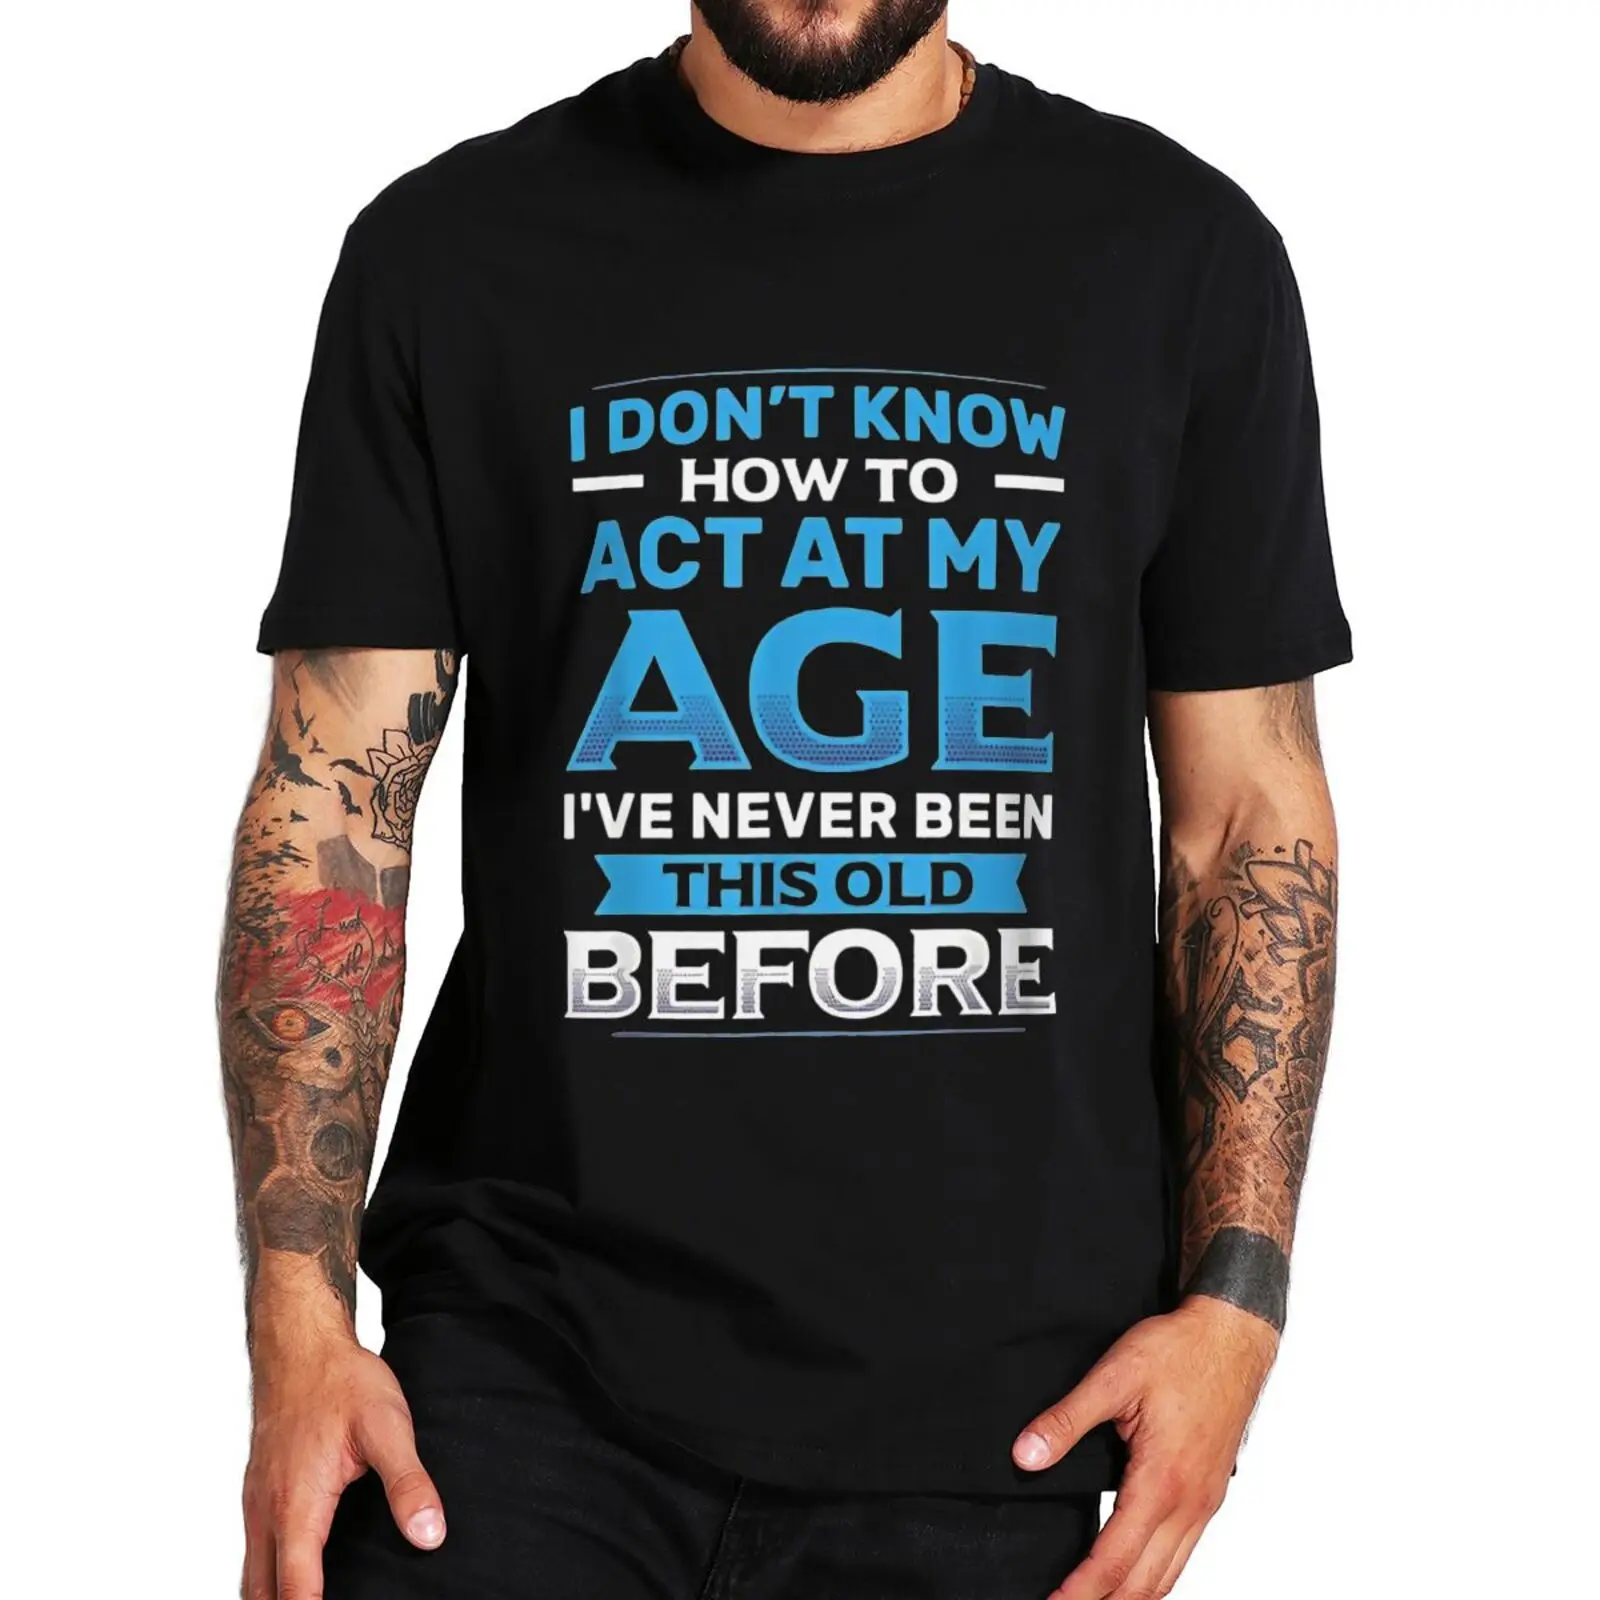 

I Dont Know How to Act My Age I've Never Been This Old Before T Shirt Funny Humor Joke Tops 100% Cotton Unisex Casual T-shirts